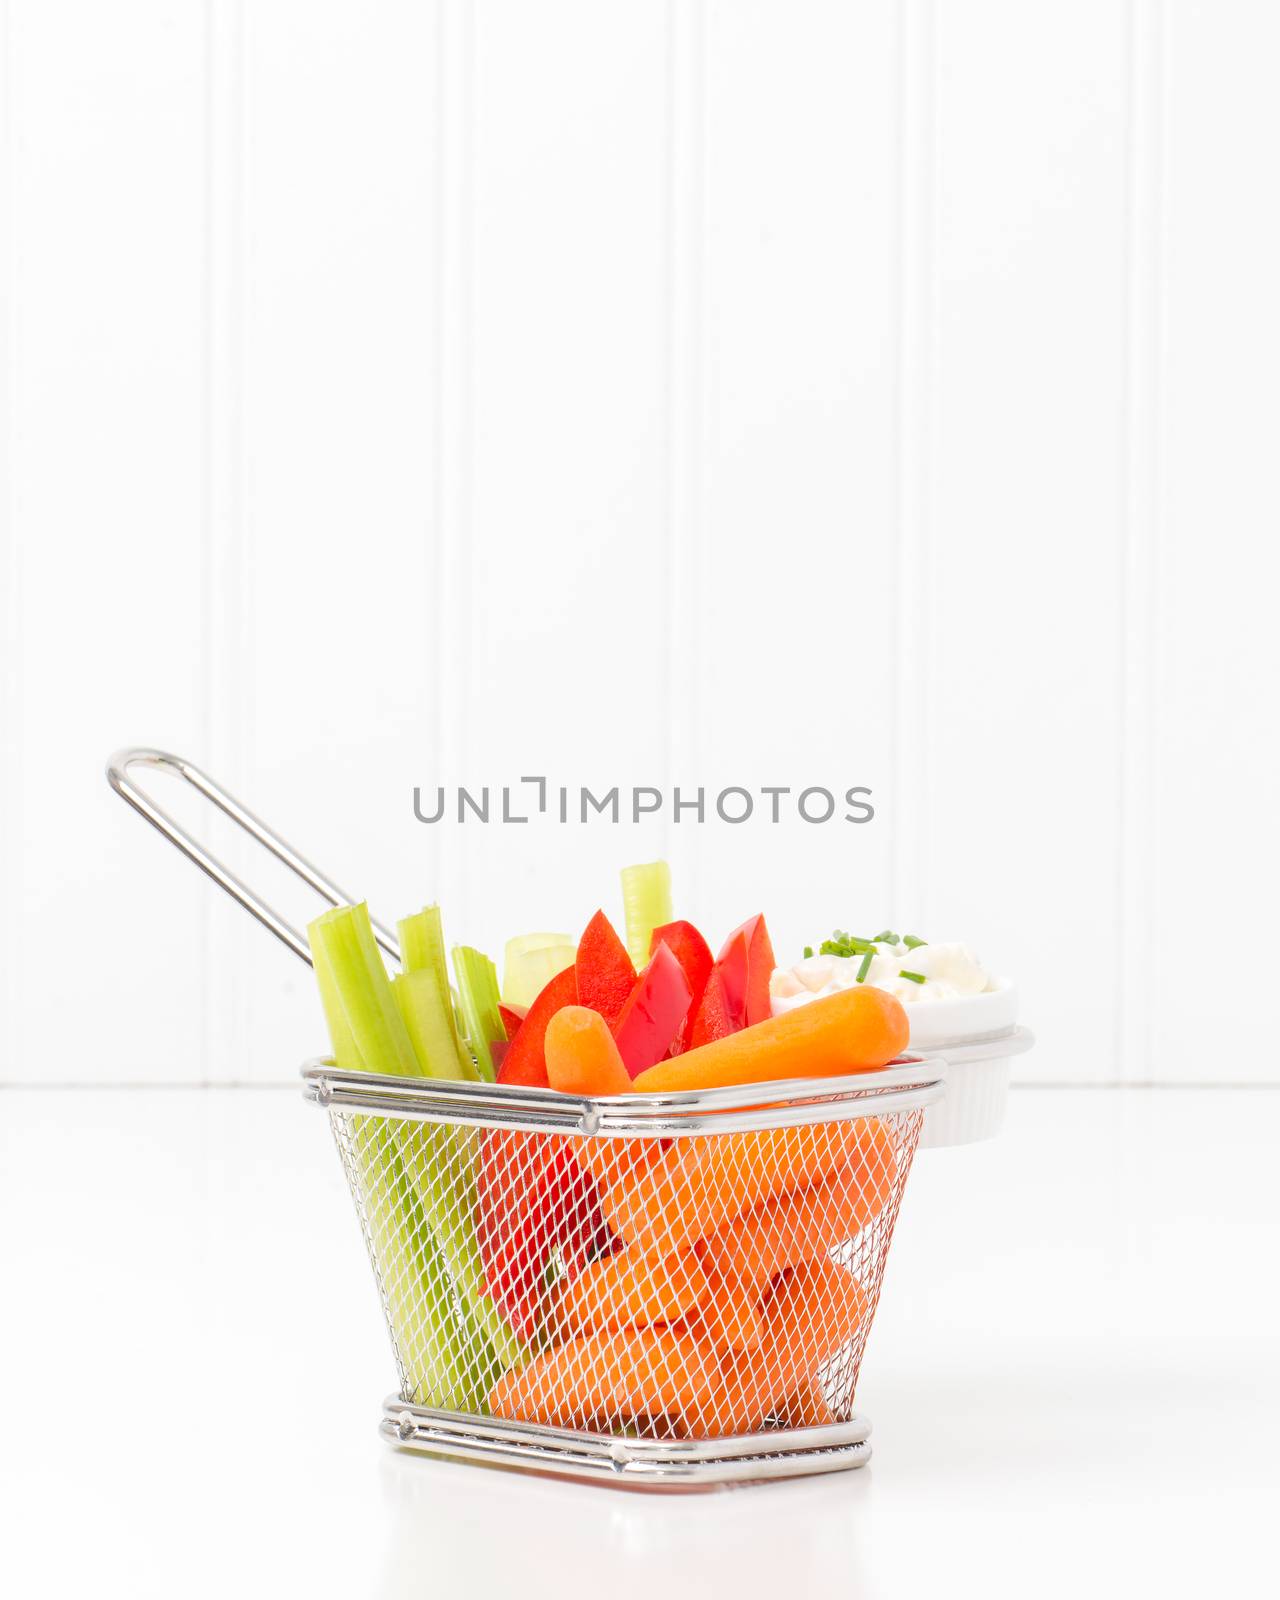 Raw Vegetables by billberryphotography